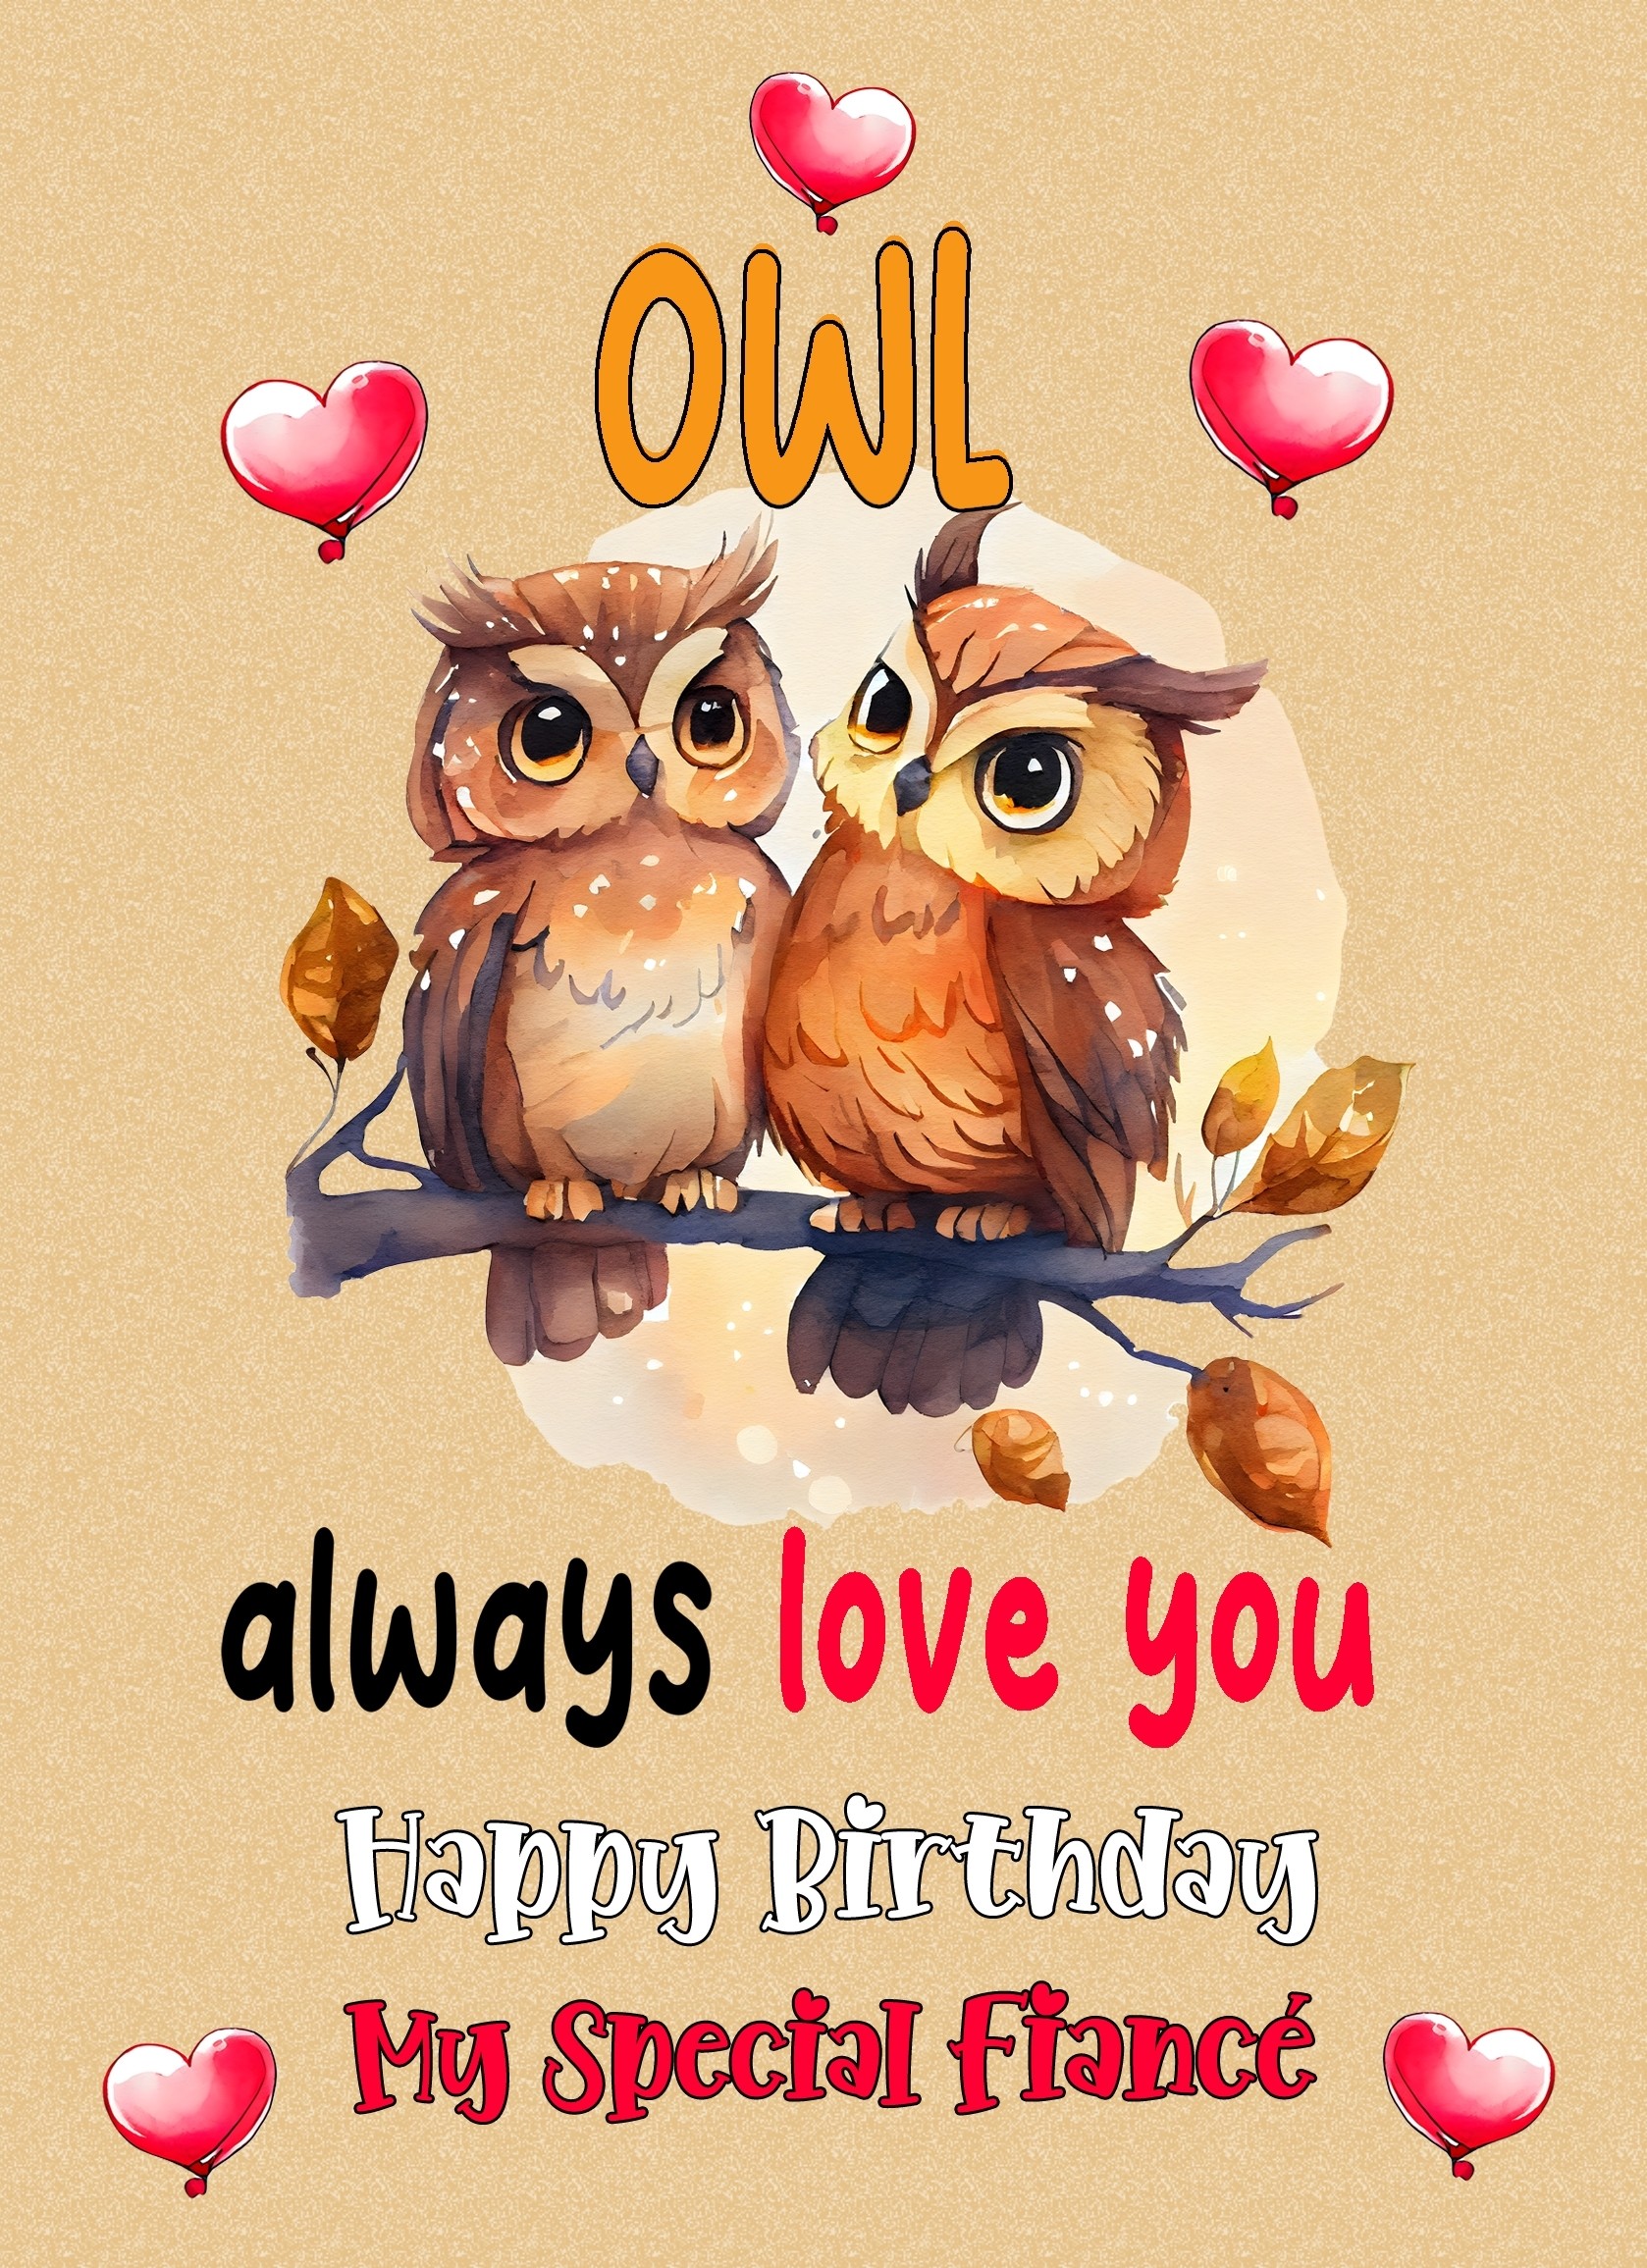 Funny Pun Romantic Birthday Card for Fiance (Owl Always Love You)